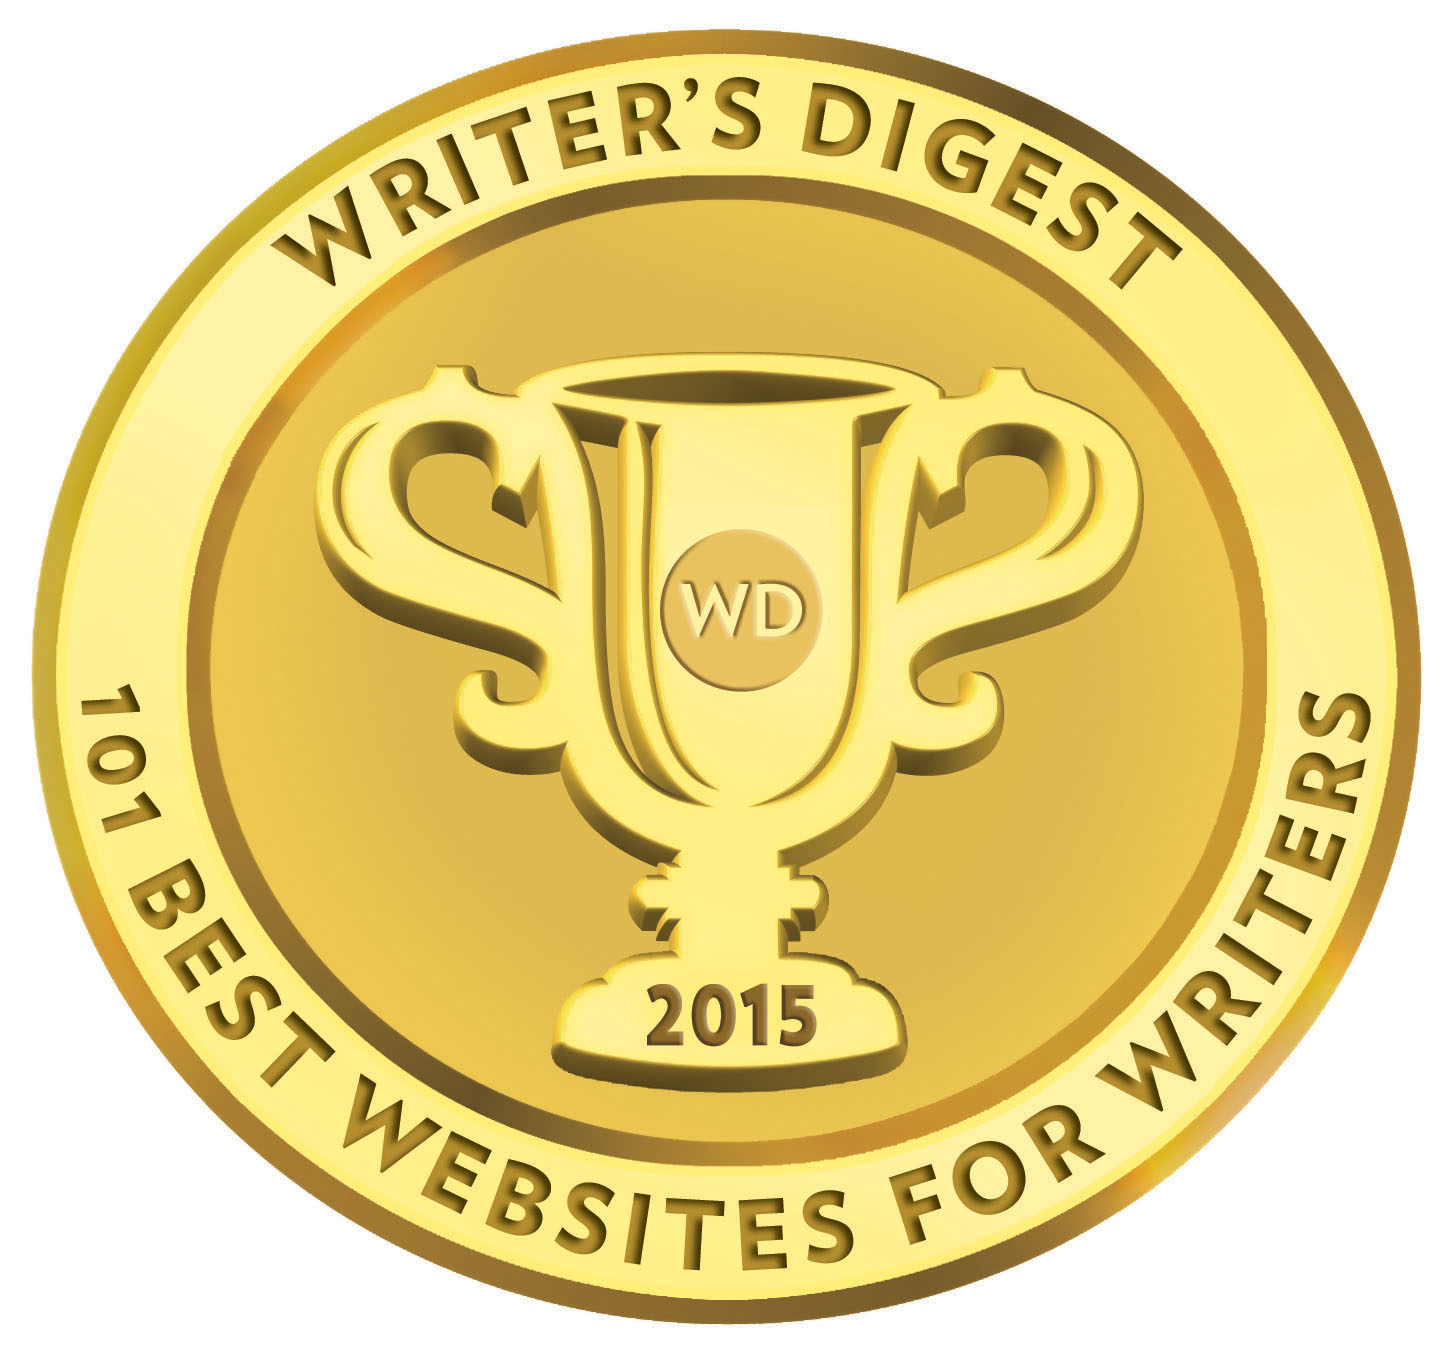 Winning Writers is one of the 101 Best Websites for Writers (Writer's Digest, 2015)